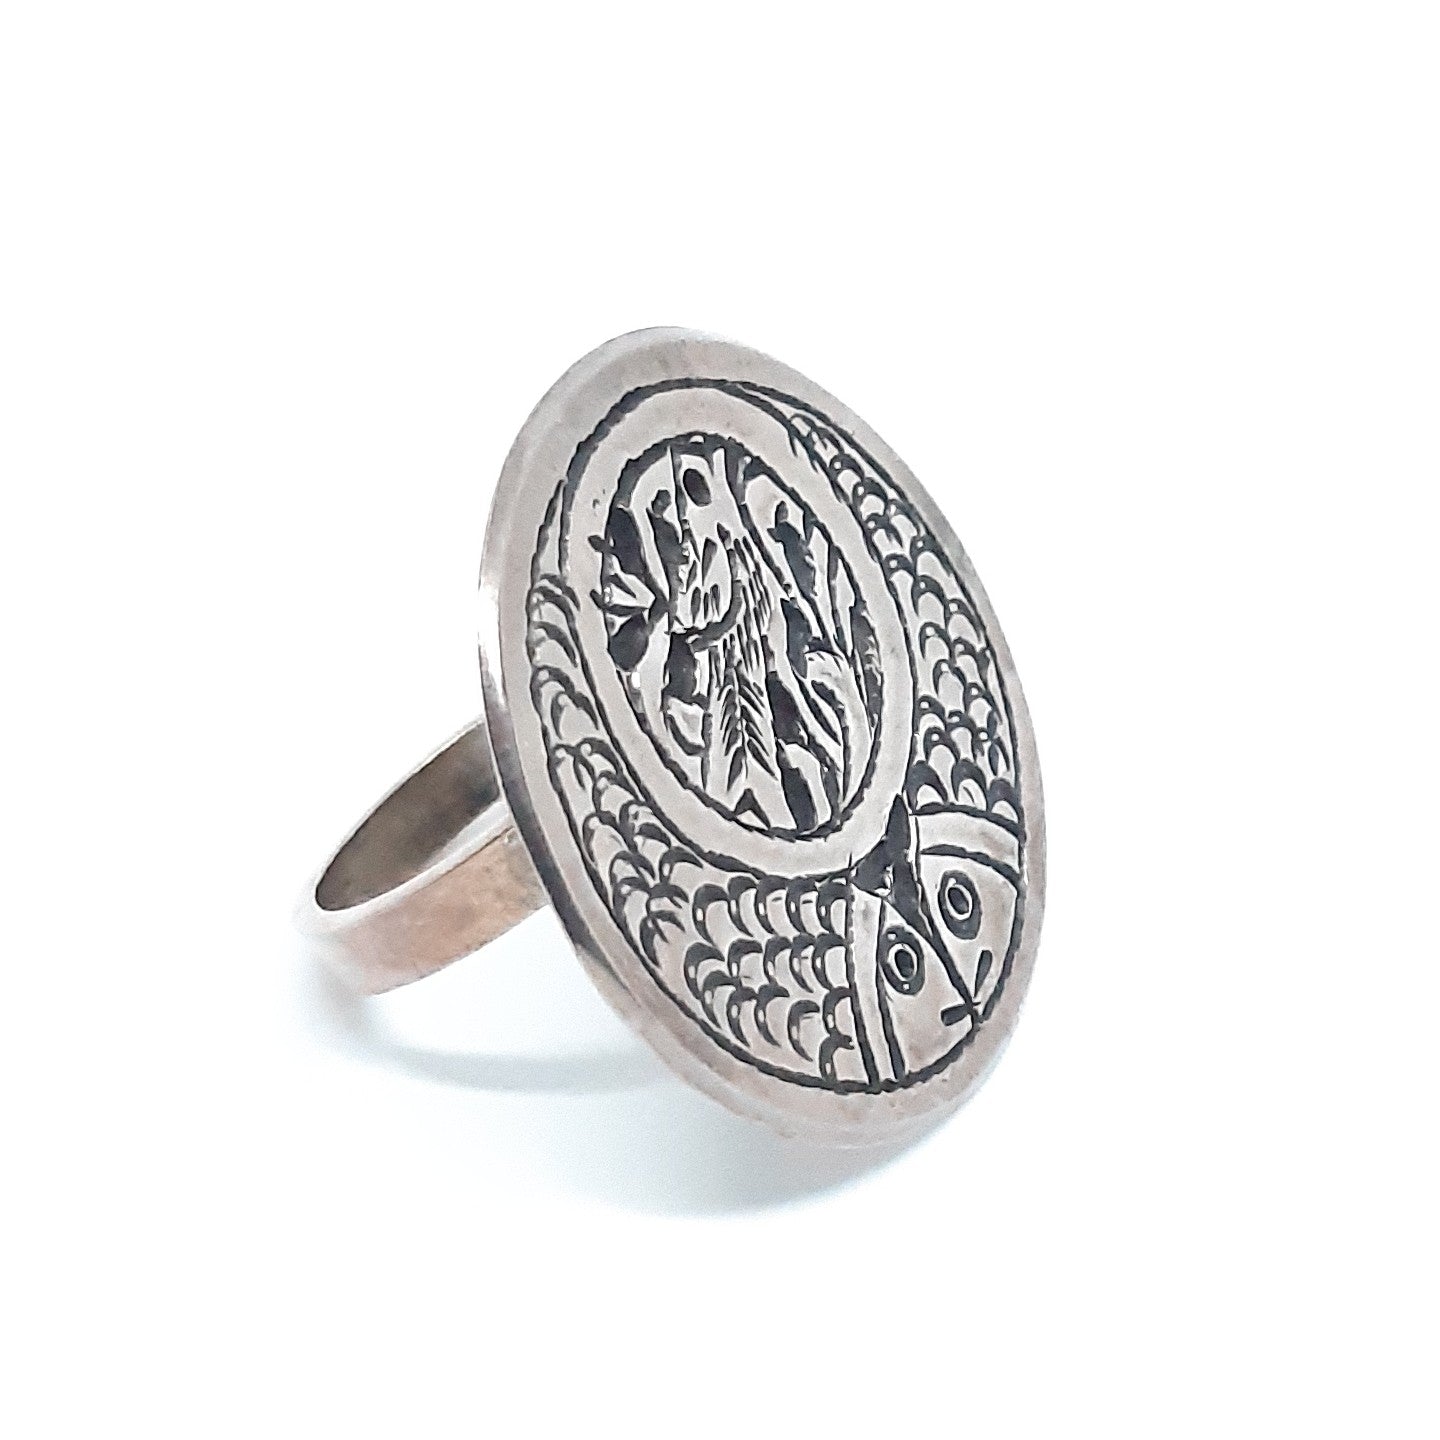 Berber round ring in 925 silver for women 